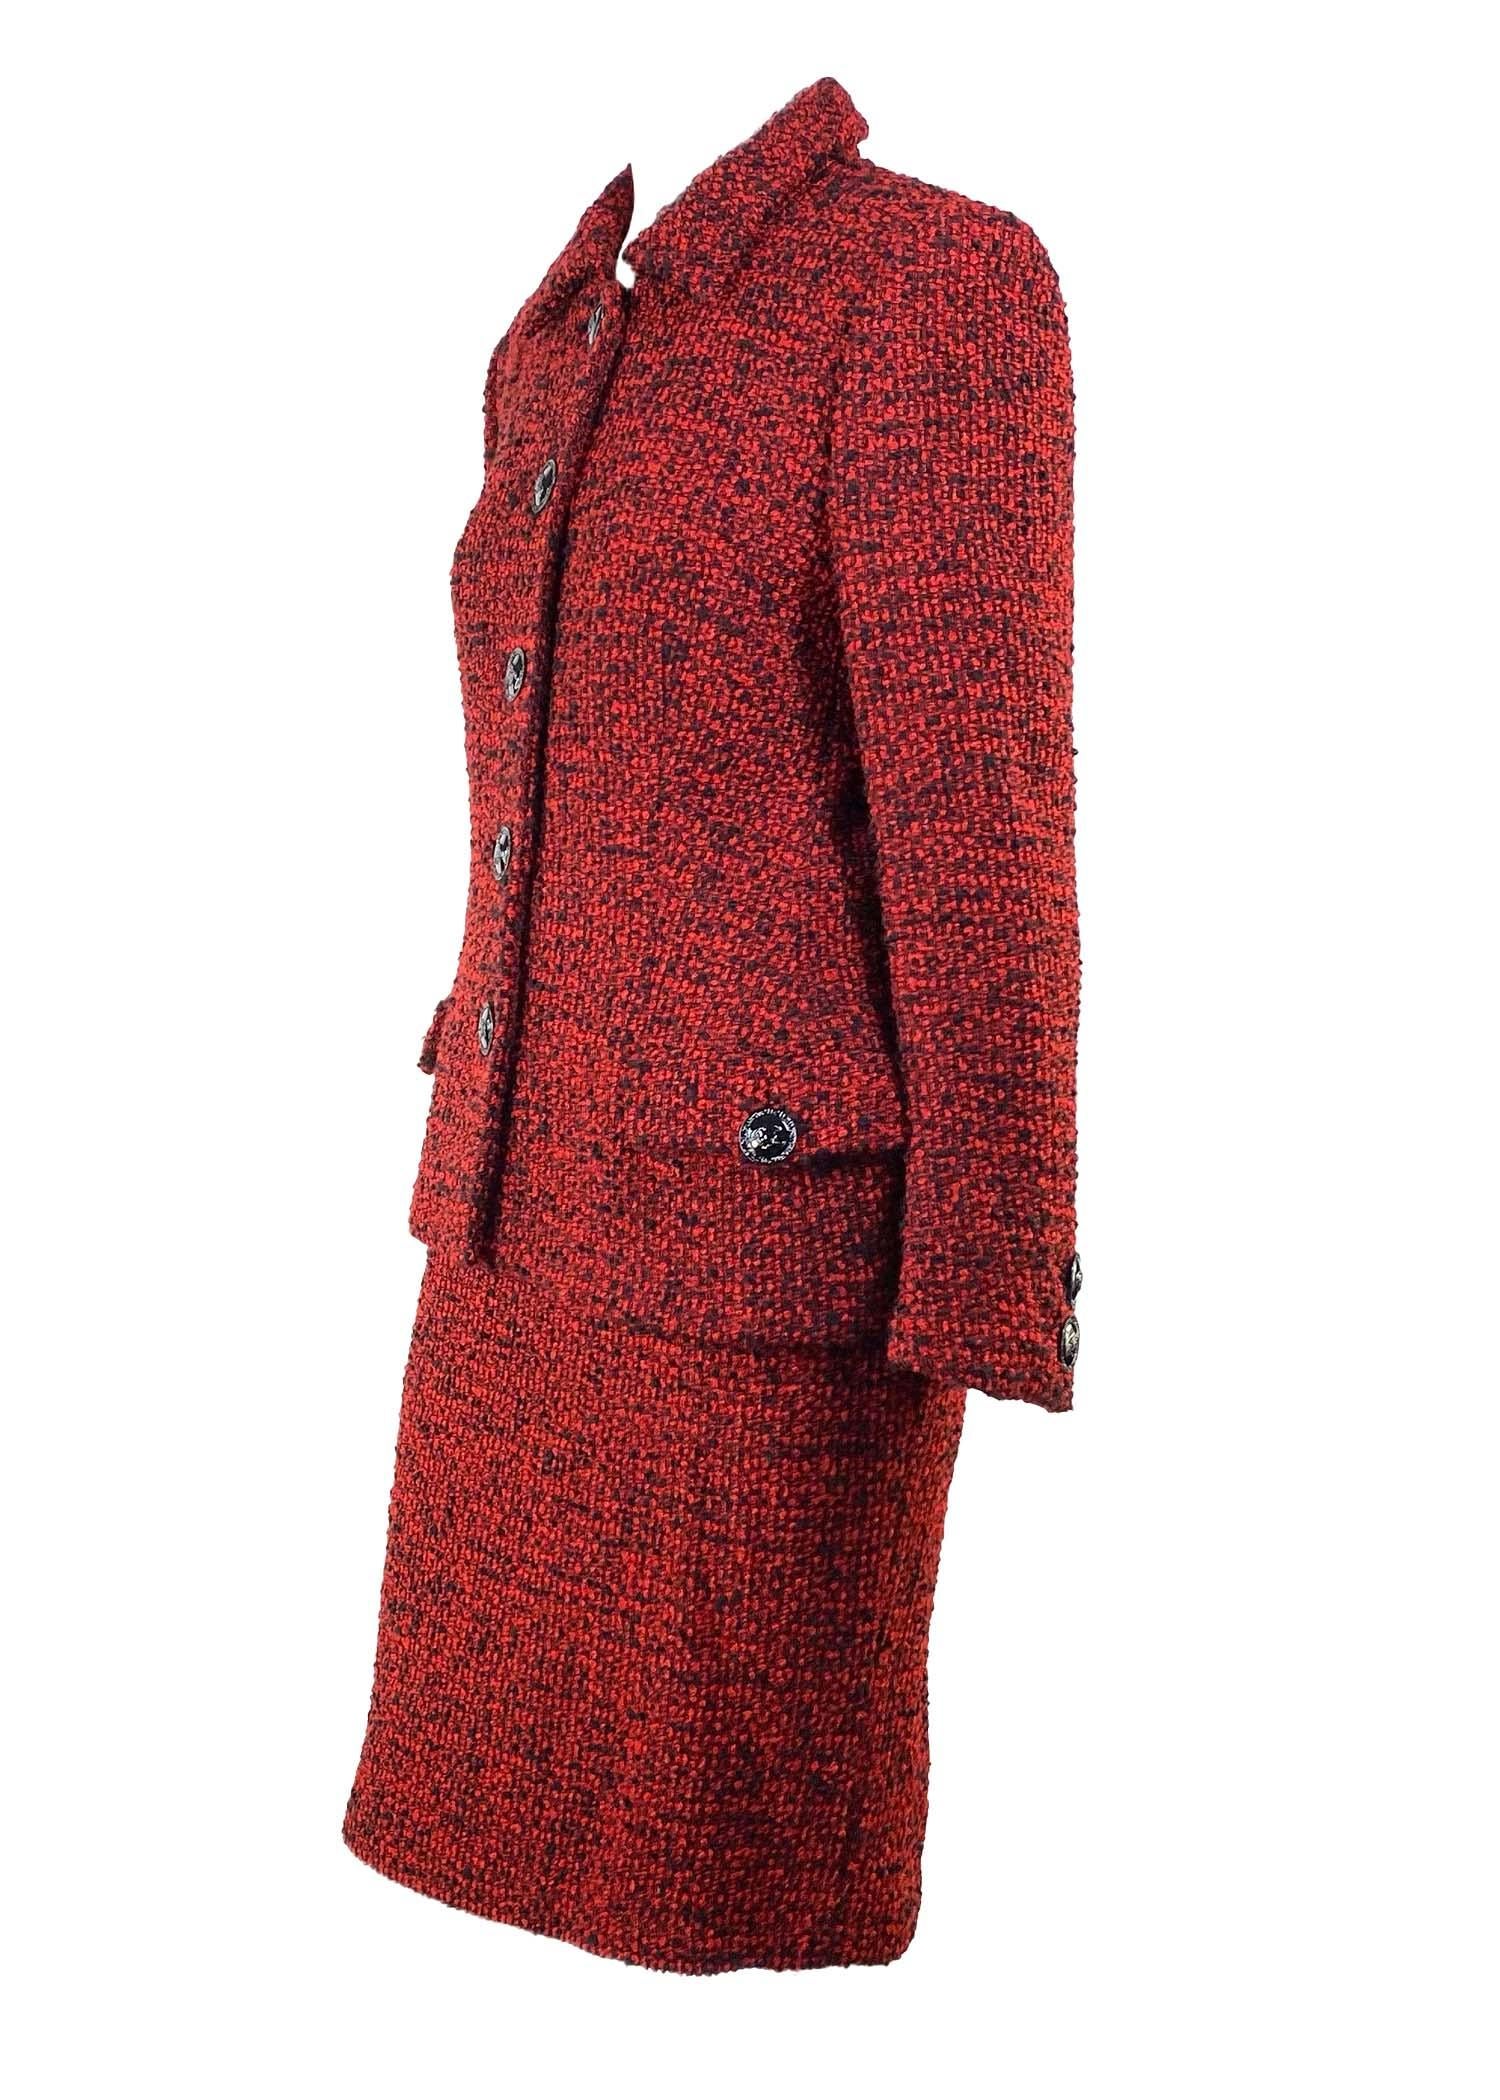 F/W 1995 Gianni Versace Couture Runway Red Bouclé Tweed Skirt Suit Documented  For Sale 1